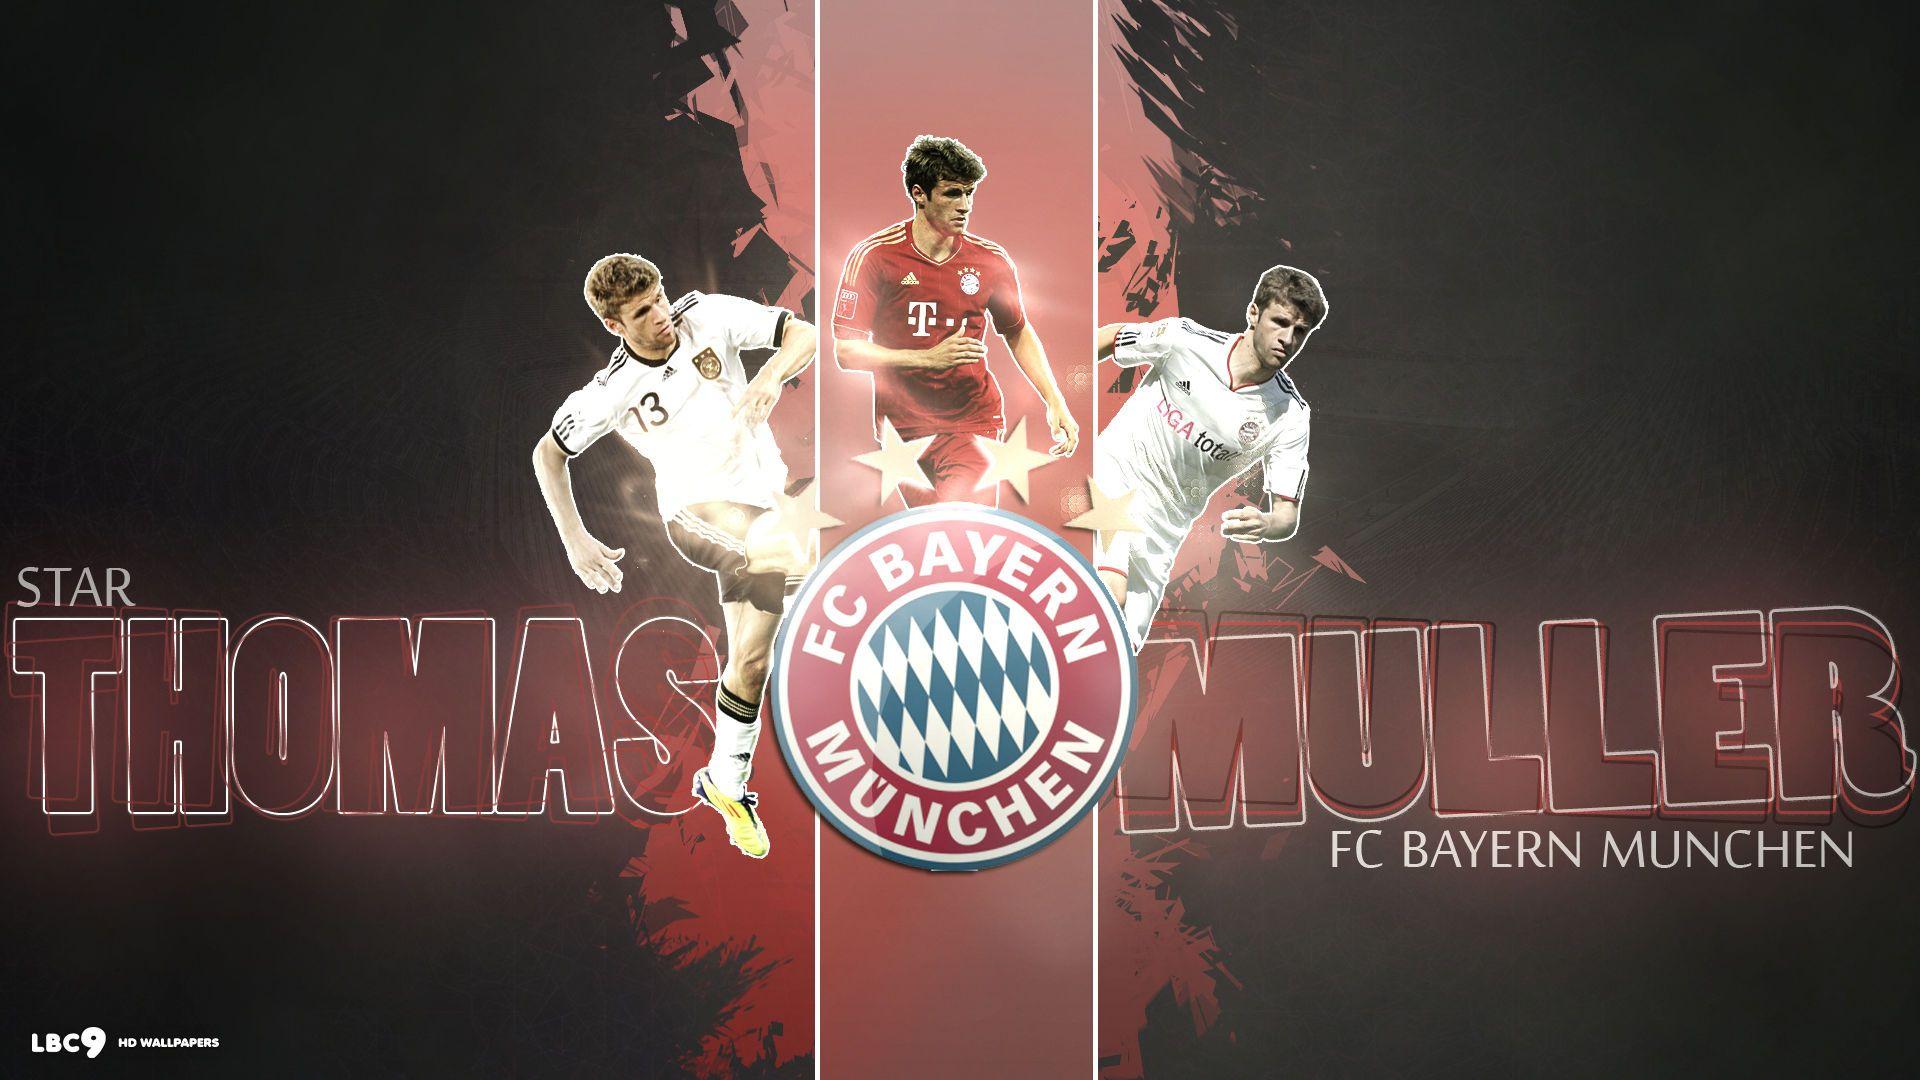 Thomas Muller Wallpaper 5 5. Players HD Background